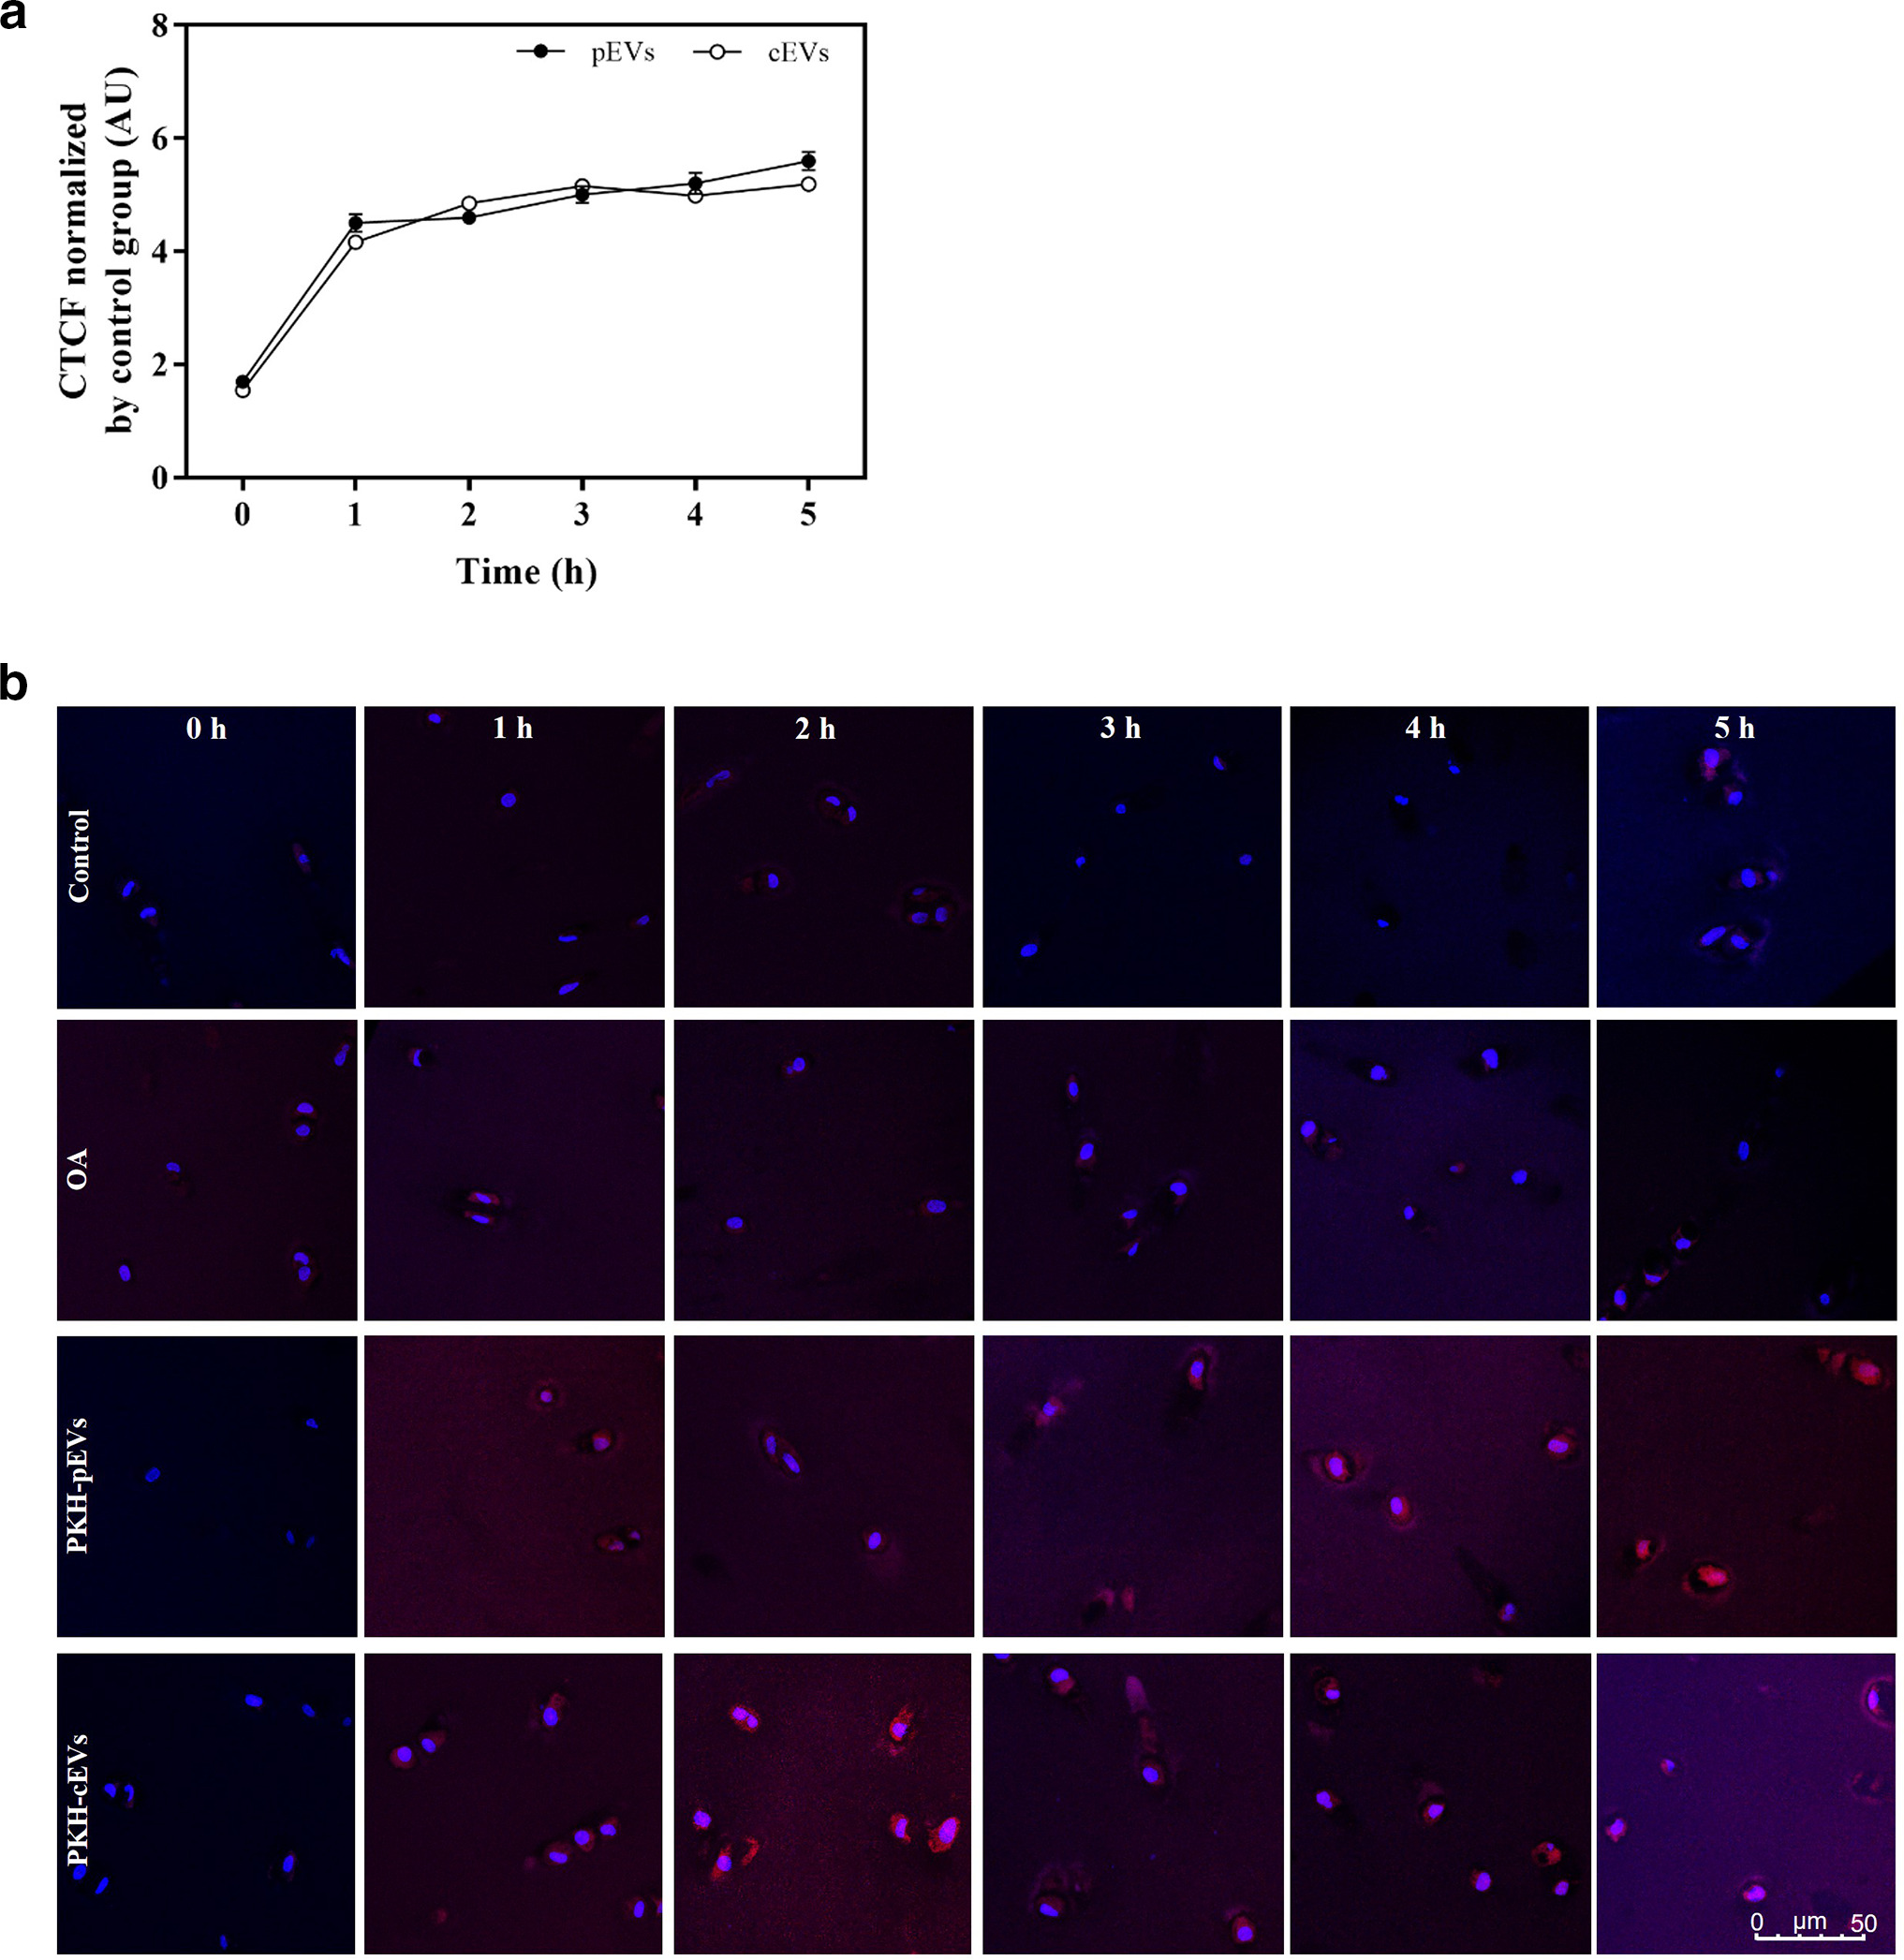 Fig. 2 
            PKH26 labelled-extracellular vesicle (EV) uptake by cartilage explants under osteoarthritis (OA)-like conditions at different time points. a) Corrected total cell fluorescence (CTCF) of cartilage explants under inflammatory stimulus to induce OA-like conditions, treated with PKH26 labelled-EVs (1 × 109 particles of PKH-pEVs or PKH-cEVs) and monitored at one, two, three, four, and five hours. Results were normalized by the mean background signal of the control and OA groups, which were treated with PKH26 without EVs. b) Representative confocal images of 6 µm tissue sections of cartilage explants treated, as previously described,33 at the different timepoints. Cell nuclei marked with 4′,6-diamidino-2-phenylindole (DAPI) (blue) and up-taken EVs labelled with PKH26 (red). Images were taken at 40× with their representative scale bar. Different areas from the same tissue section were photographed, and a total of 116 images were analyzed for PKH-pEV treatment and 174 images for PKH-cEV treatment. One donor was used for this experiment performing a triplicate for each treatment and time, but for the control one sample was used for each control and time. cEV, human umbilical cord mesenchymal stromal cell-derived extracellular vesicle; pEV, platelet lysate-derived extracellular vesicle. AU, arbitrary units.
          